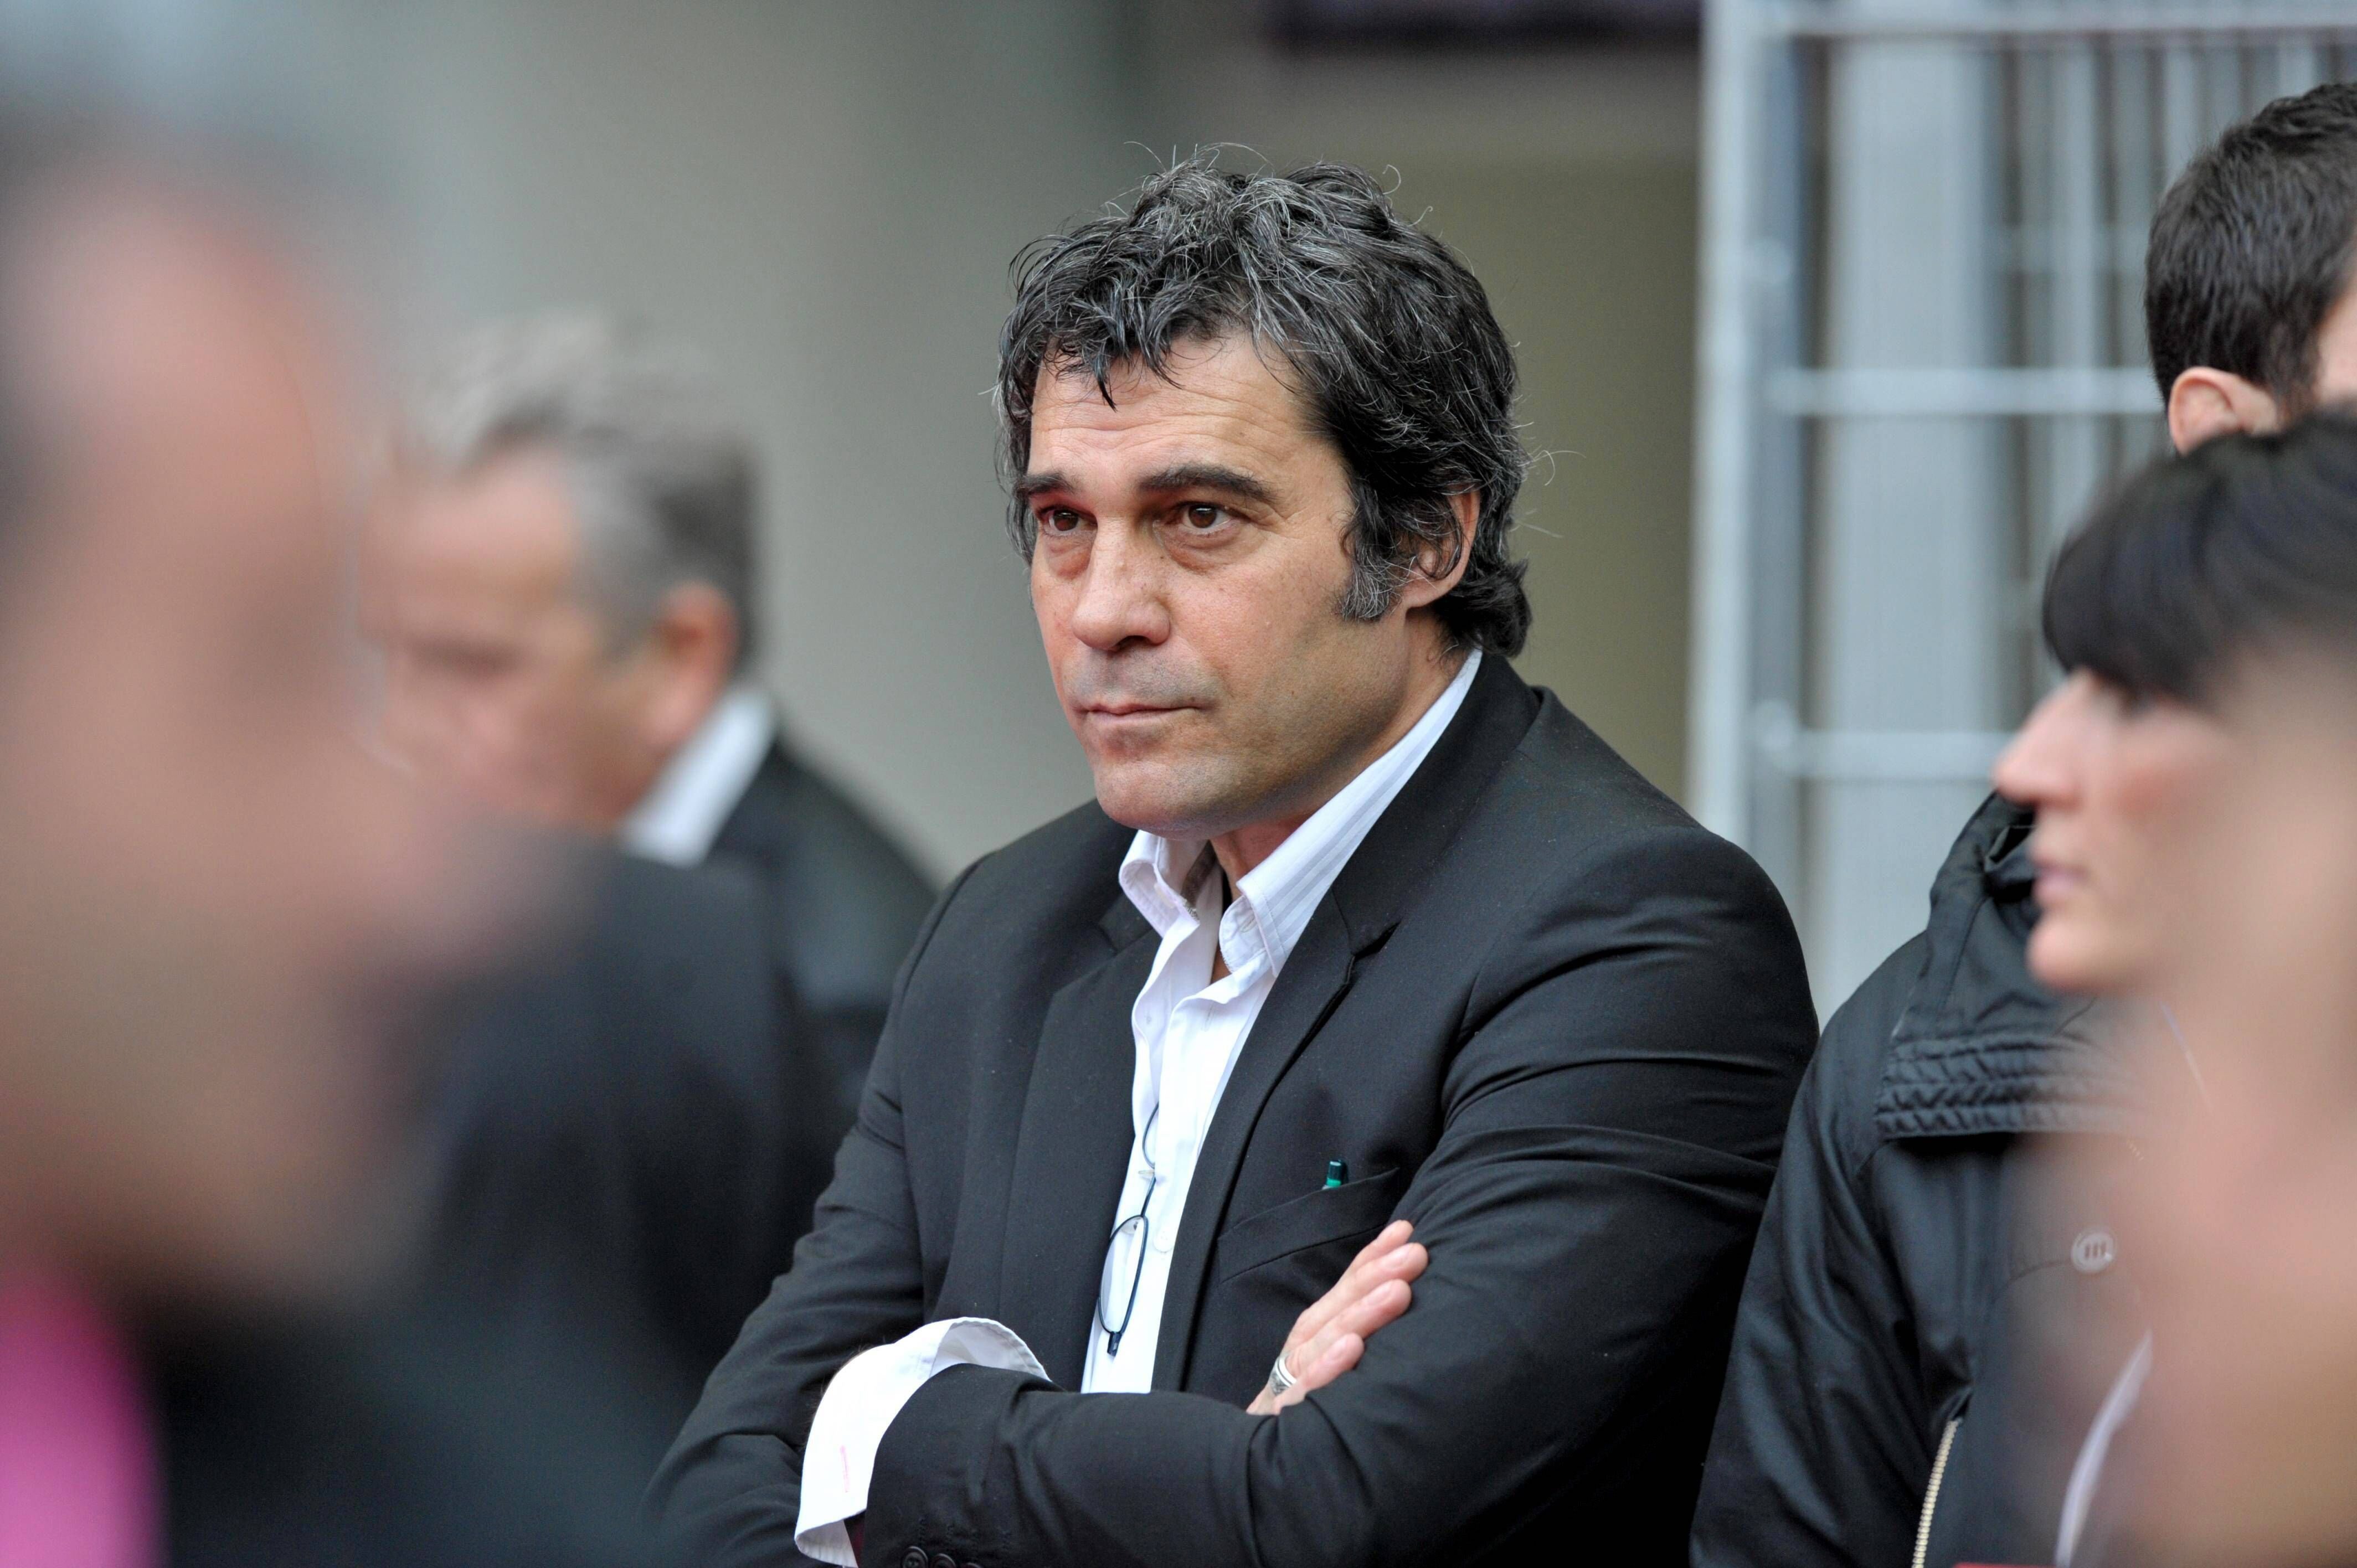 Philippe GUILLARD - 05.11.2011 - Stade Francais. | Photo : Getty Images